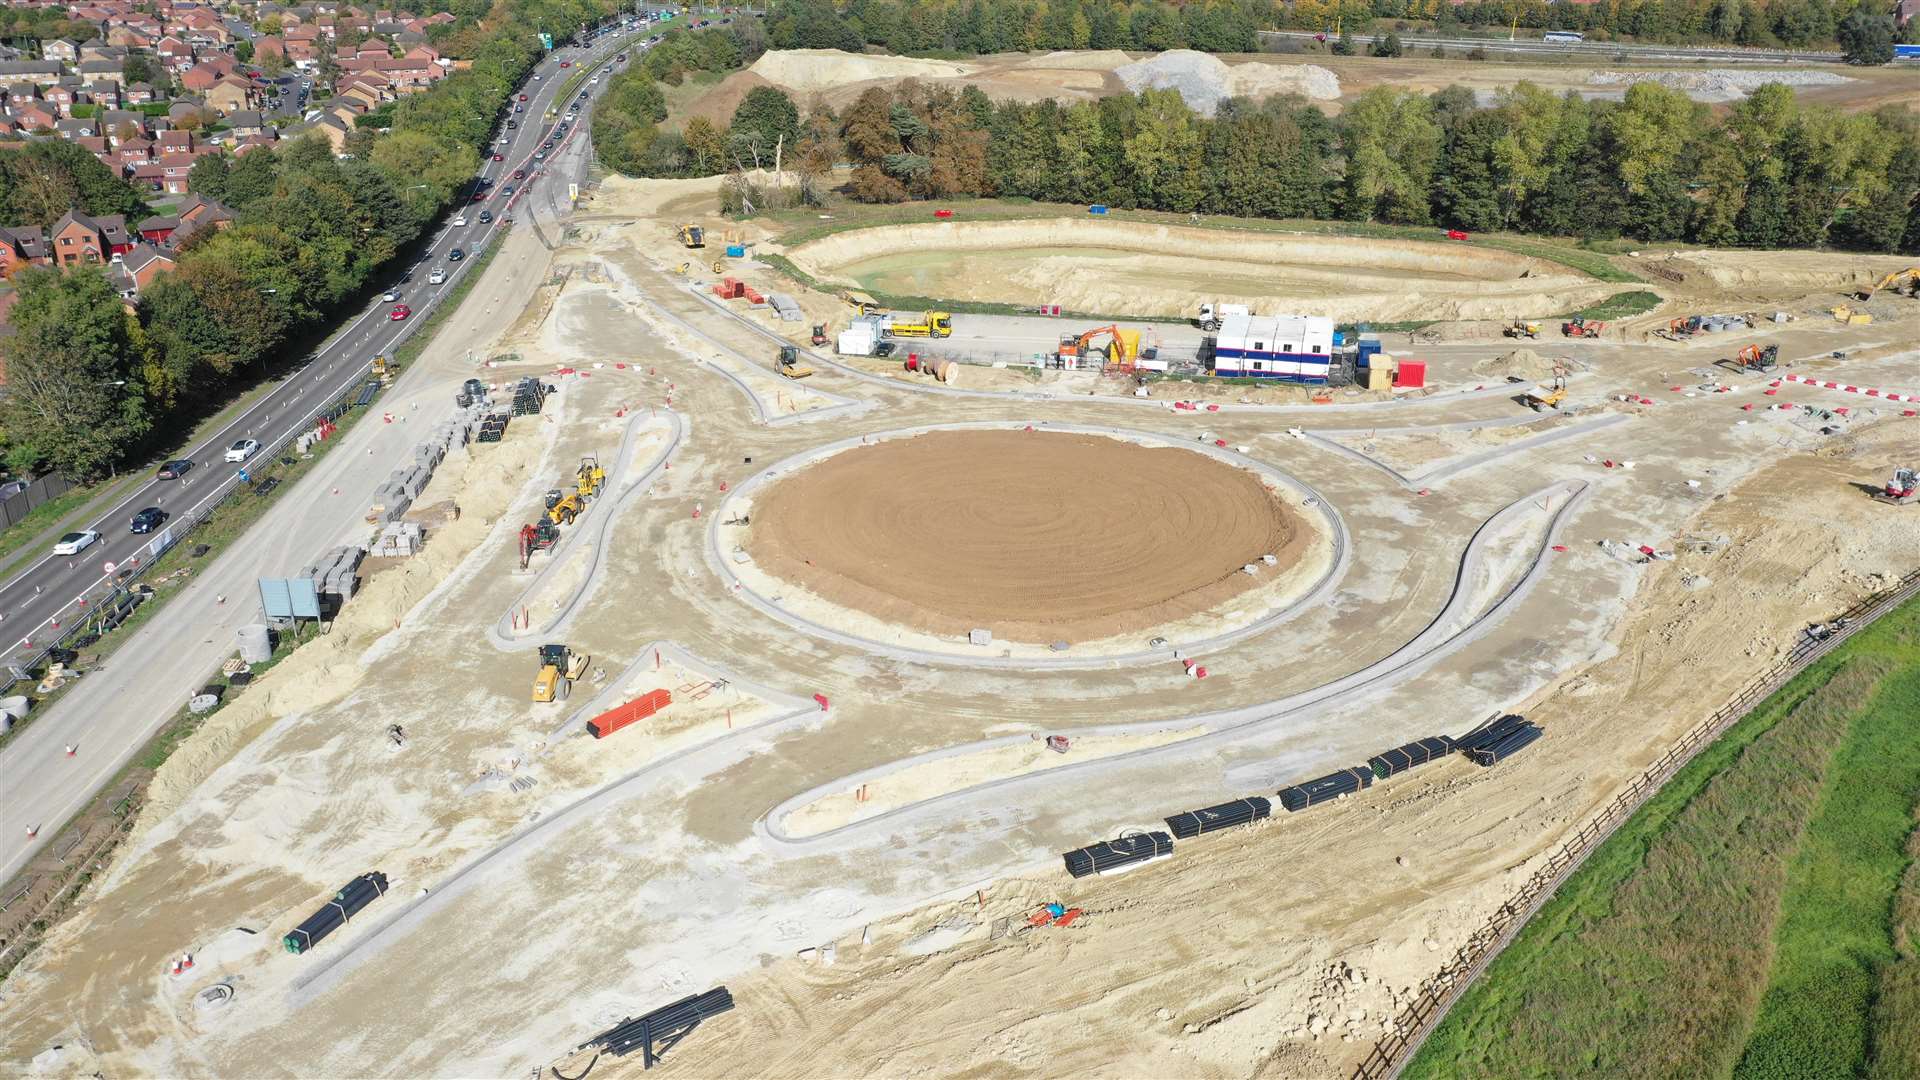 How the new roundabout looks from above. Picture: Vantage Photography / info@vantage-photography.co.uk